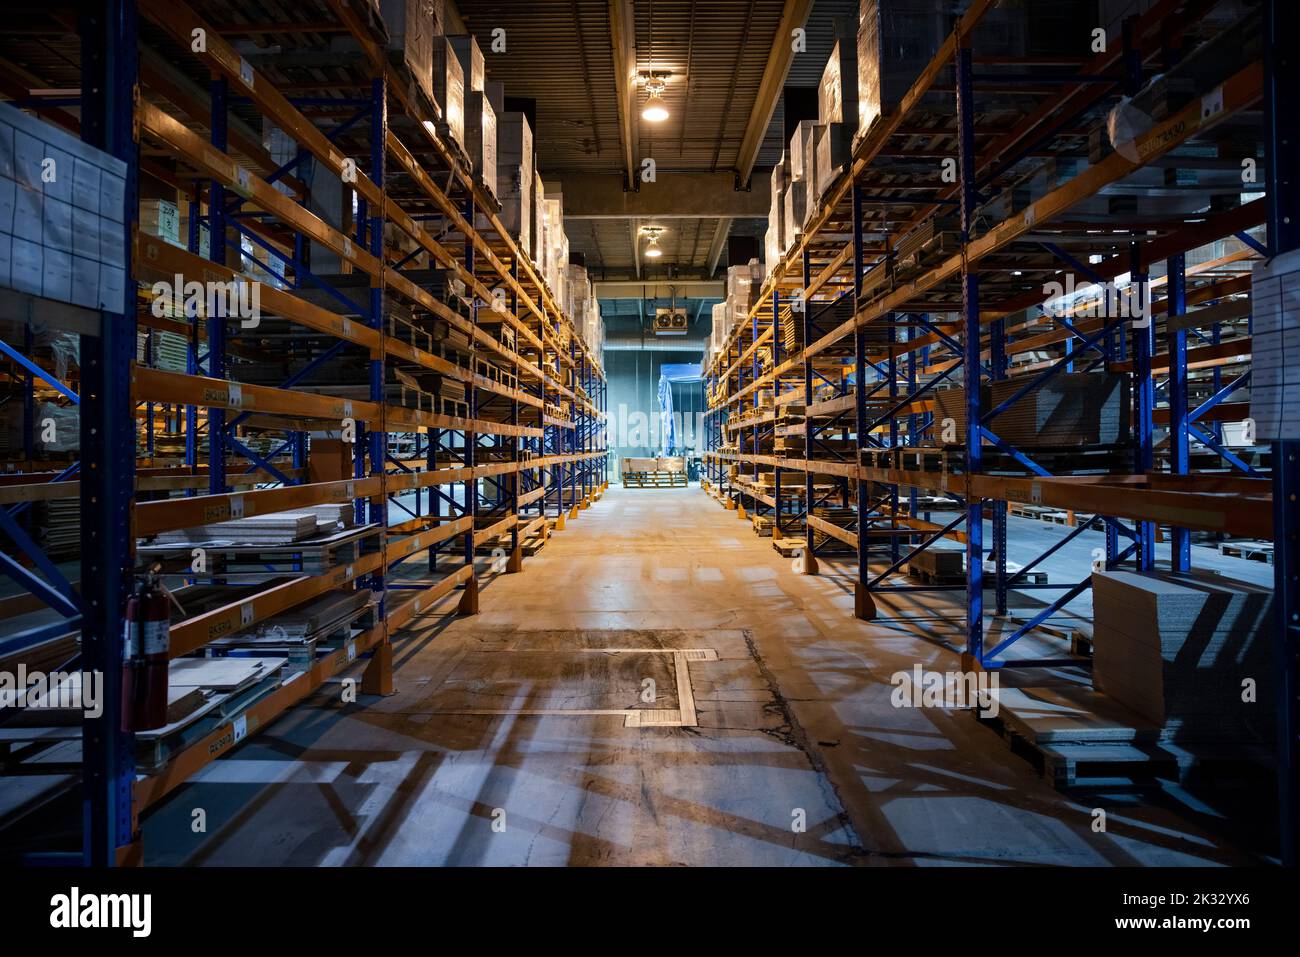 Distribution warehouse with high shelves Stock Photo